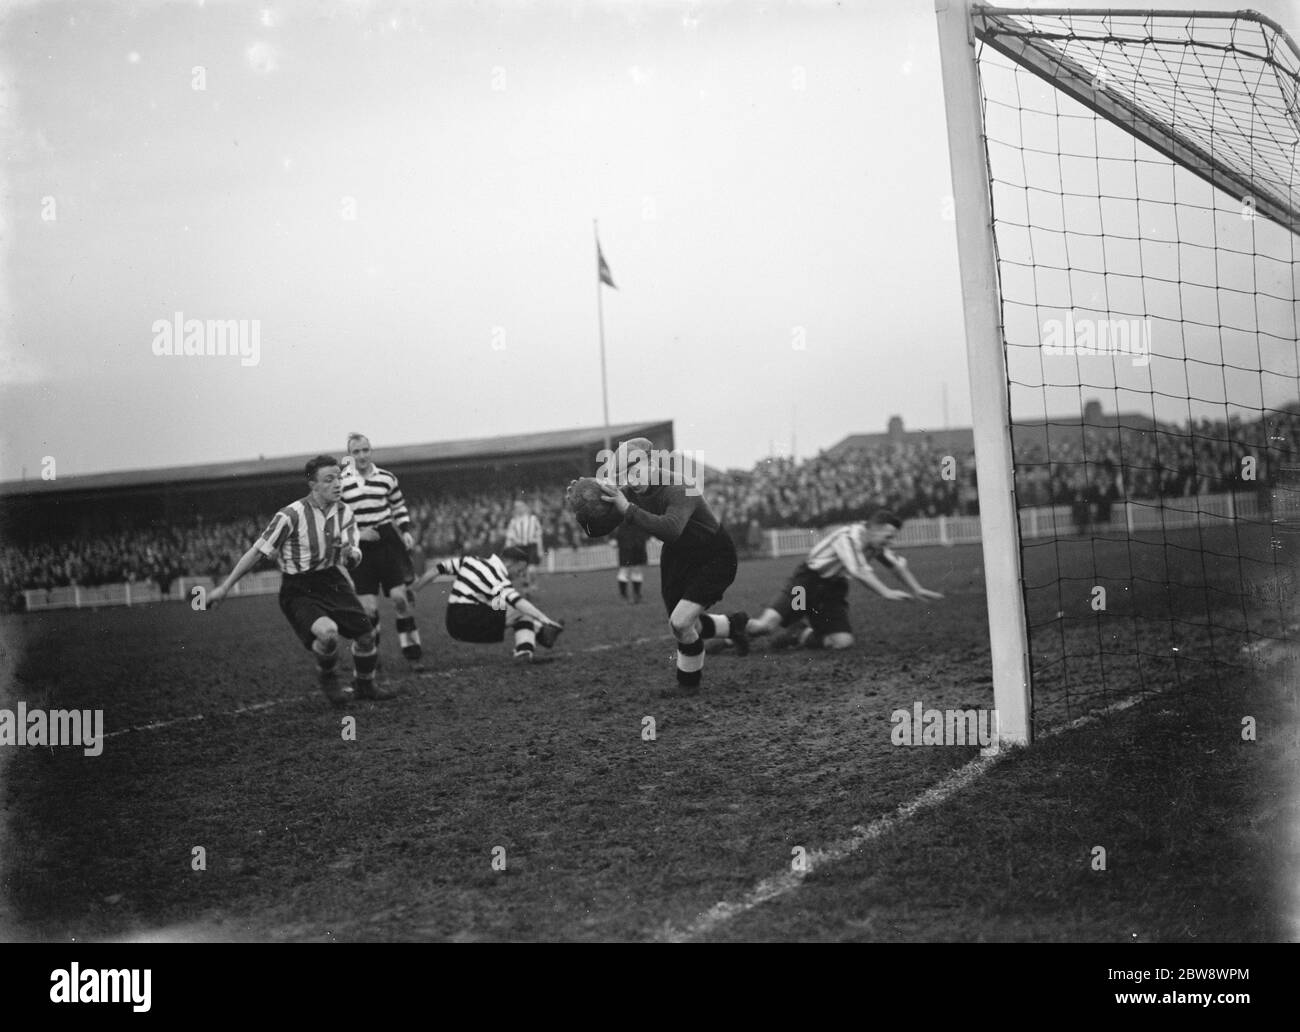 Dartford versus Darlington football match . Action in front of the goal , the goalkeeper makes a save . 1937 Stock Photo